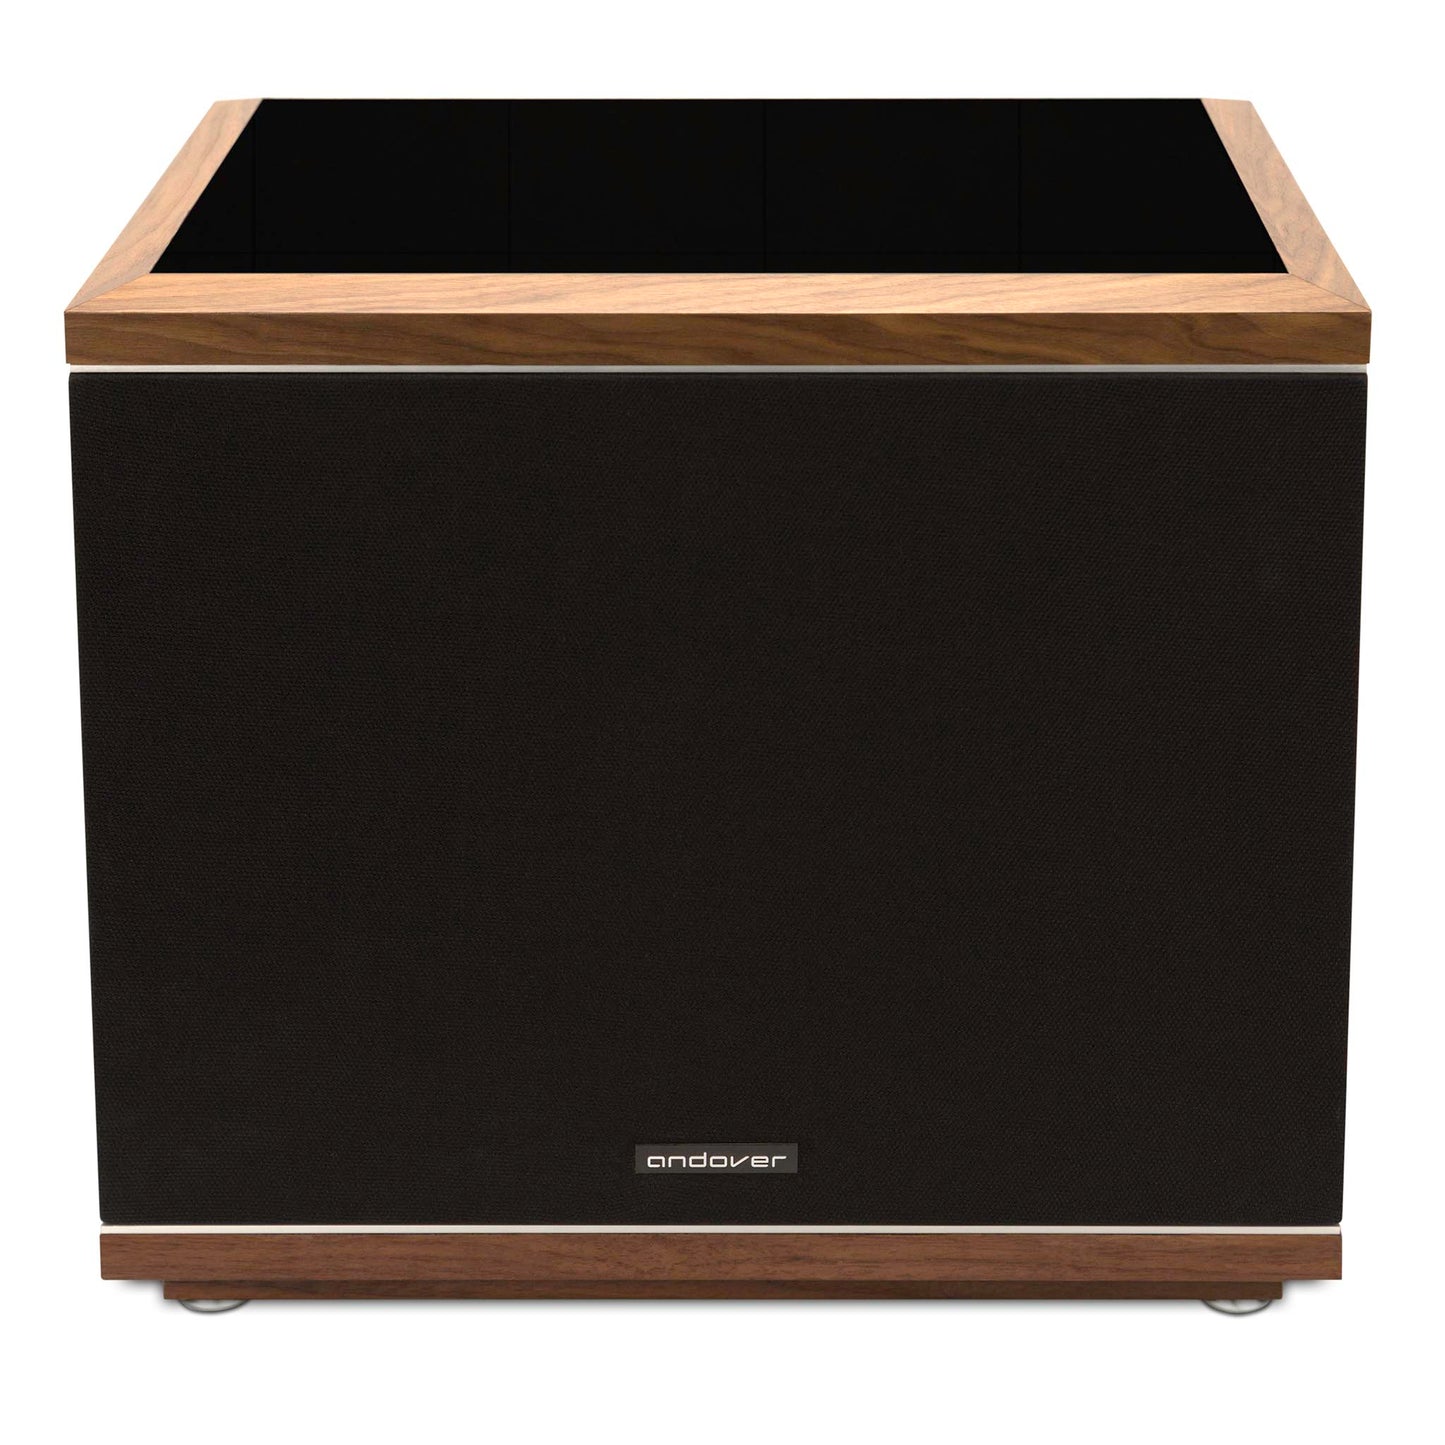 Andover Audio Model Powered Subwoofer